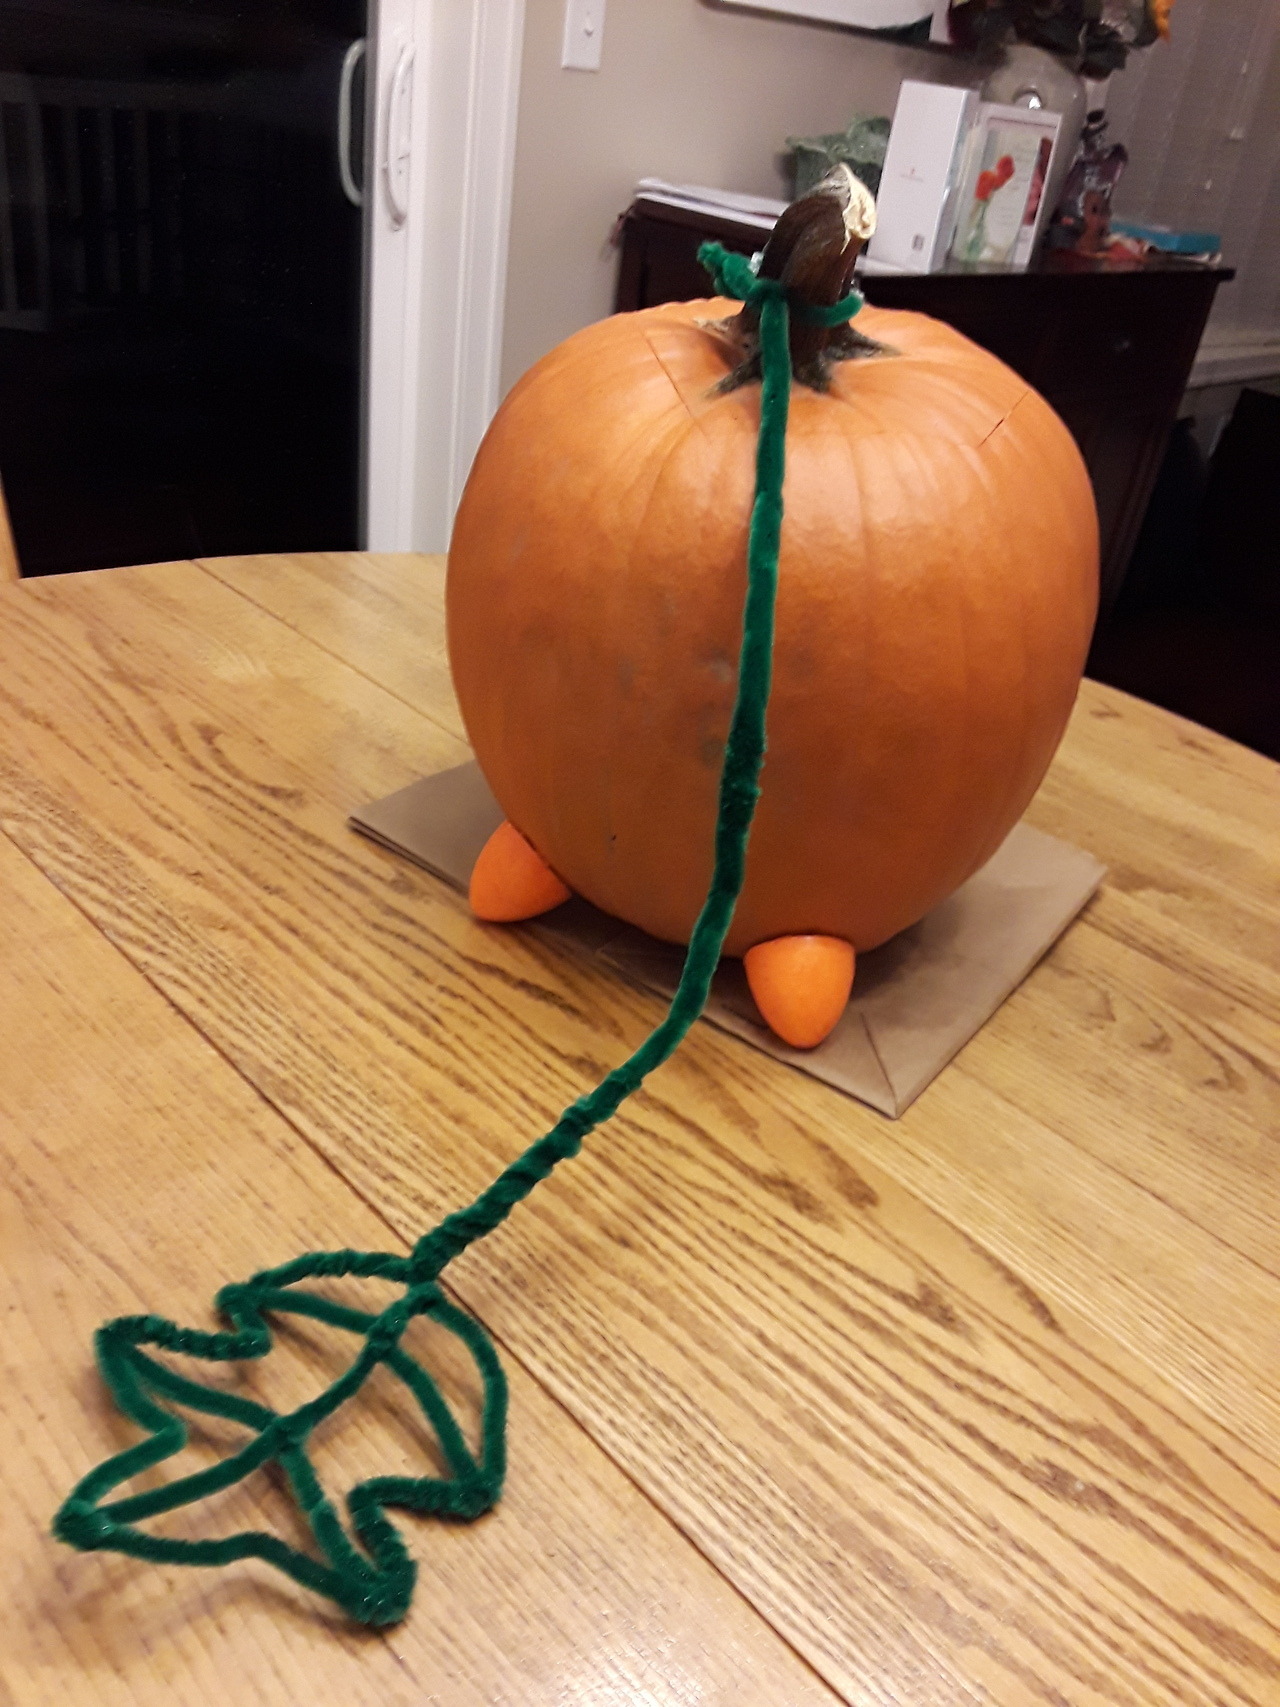 Happy Halloween! @screama-renren and I made Pumpkin the pumpkin dog from Steven Universe! The tail is made of pipe cleaners, and the feet are styrofoam painted orange. Hope this gets you in a spoopy...